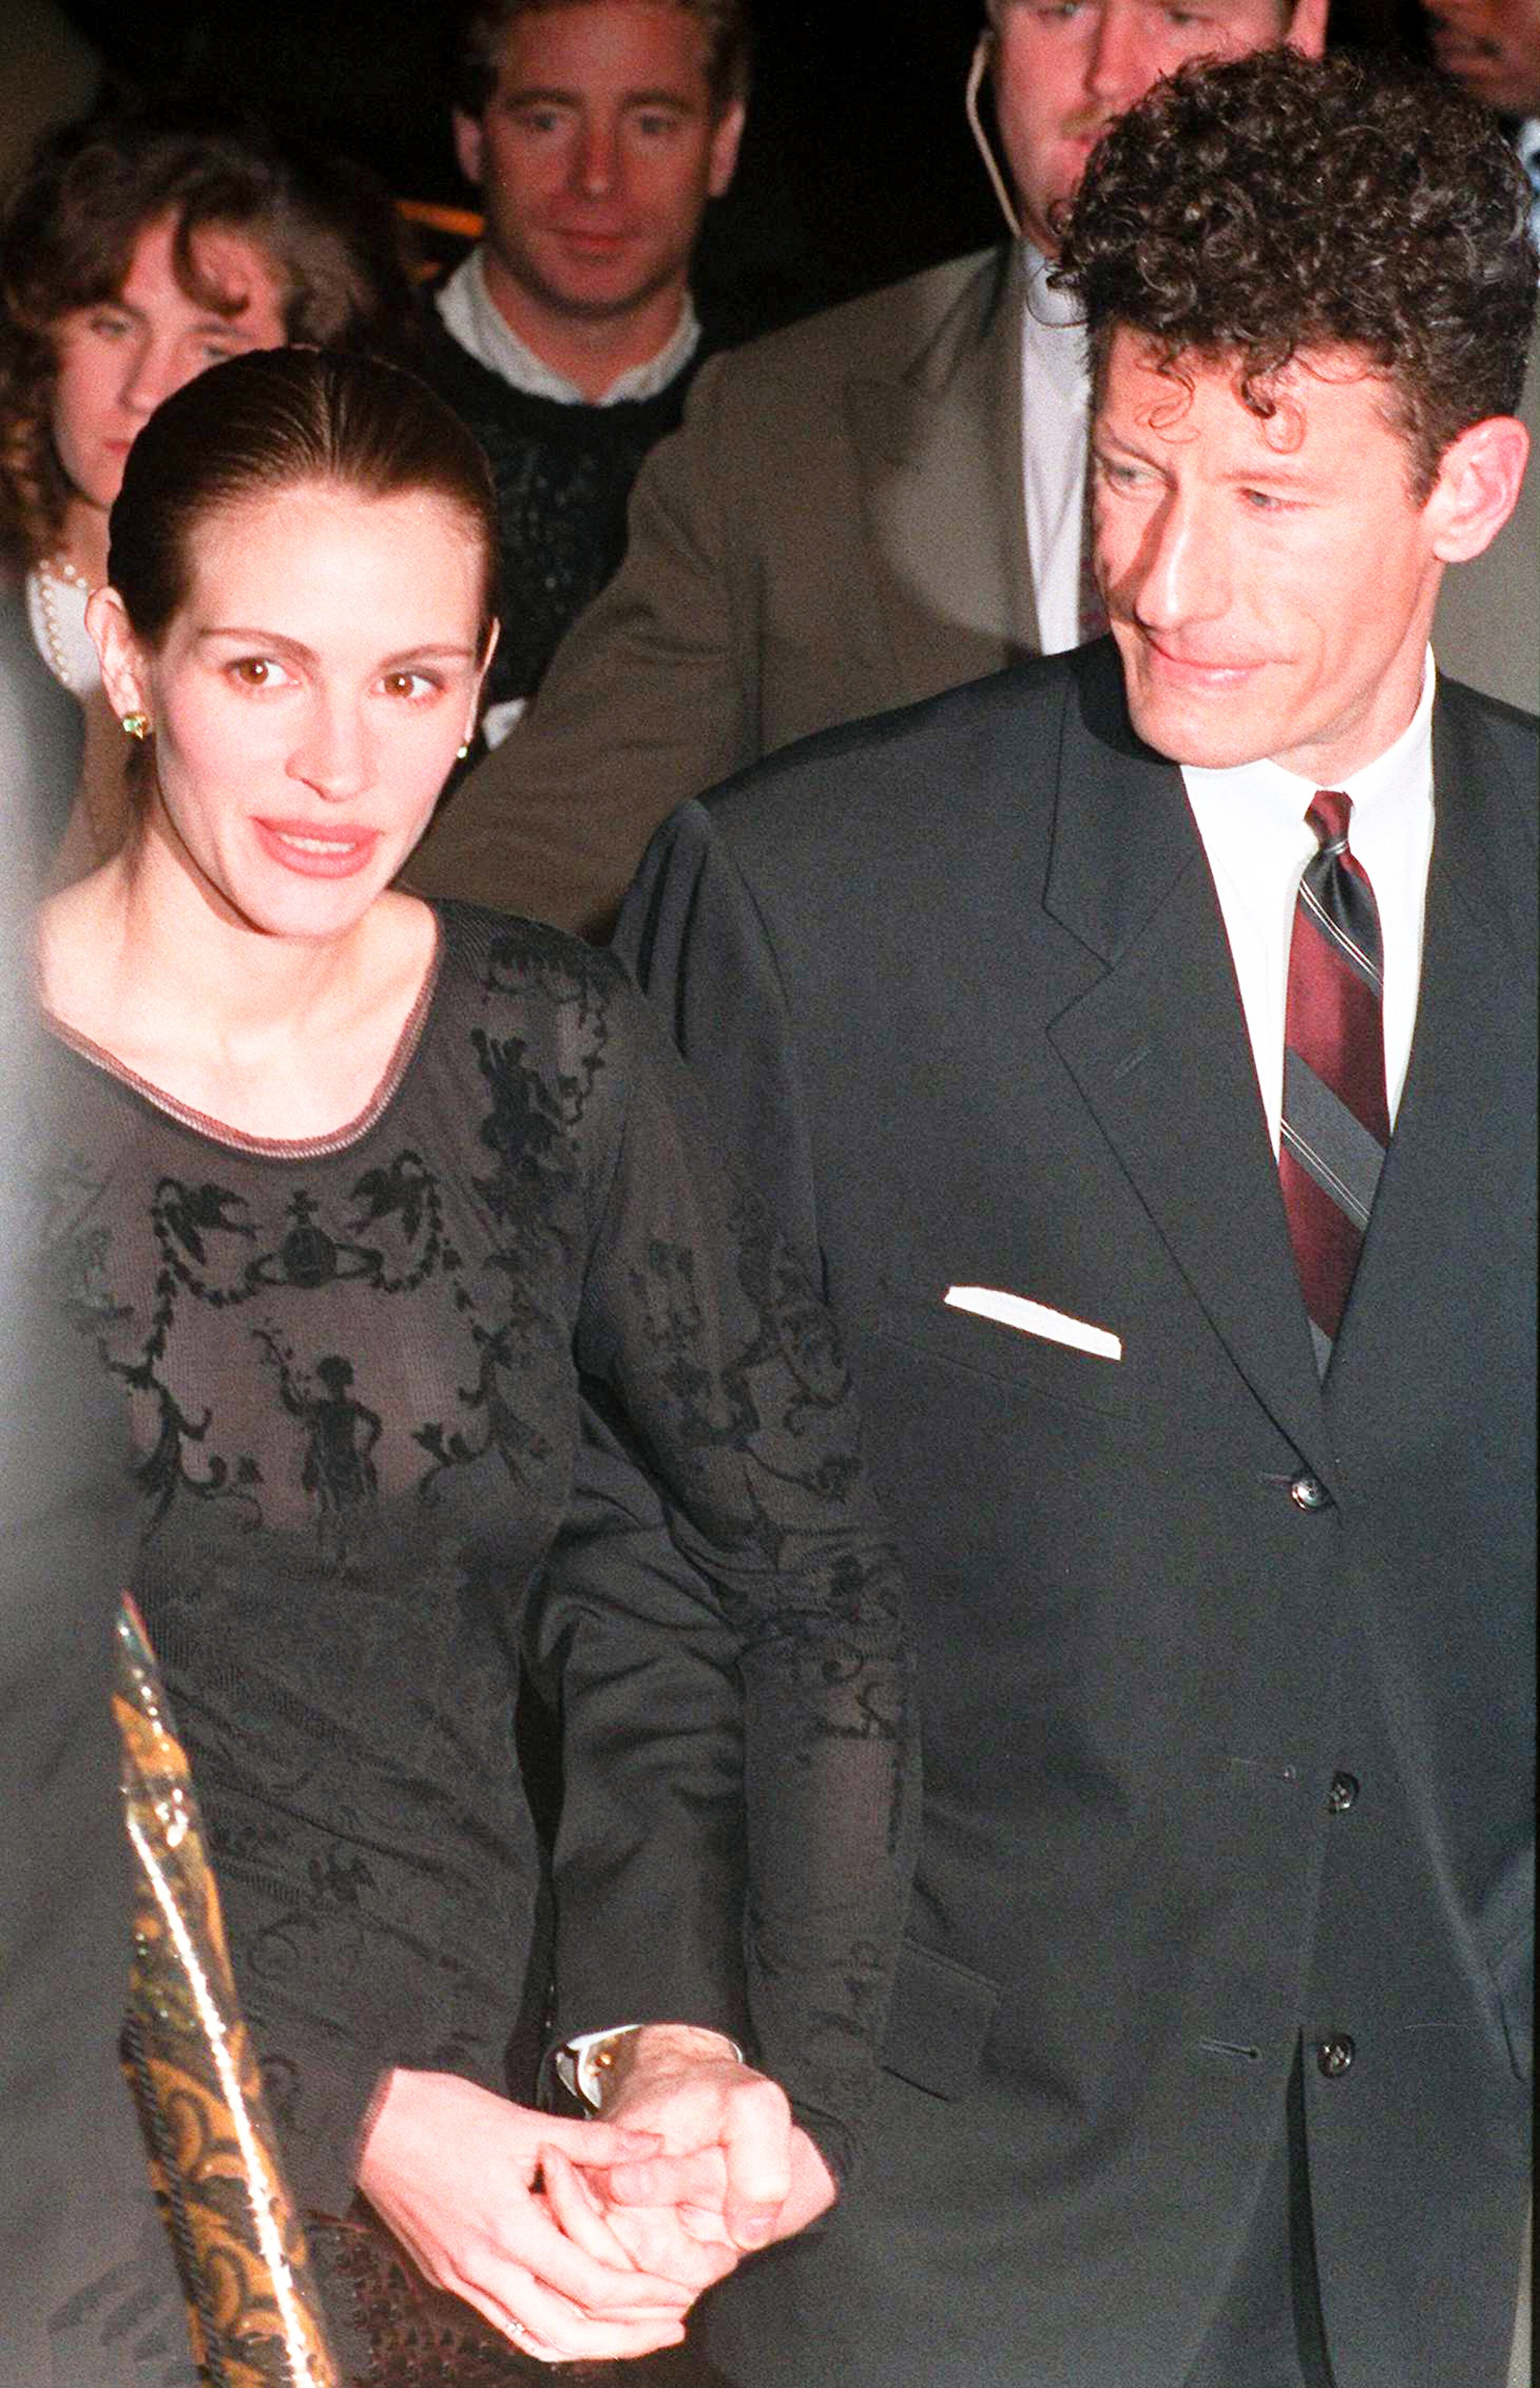 Julia Roberts with her husband, country singer and songwriter Lyle Lovett, circa 1993. | Source: Getty Images